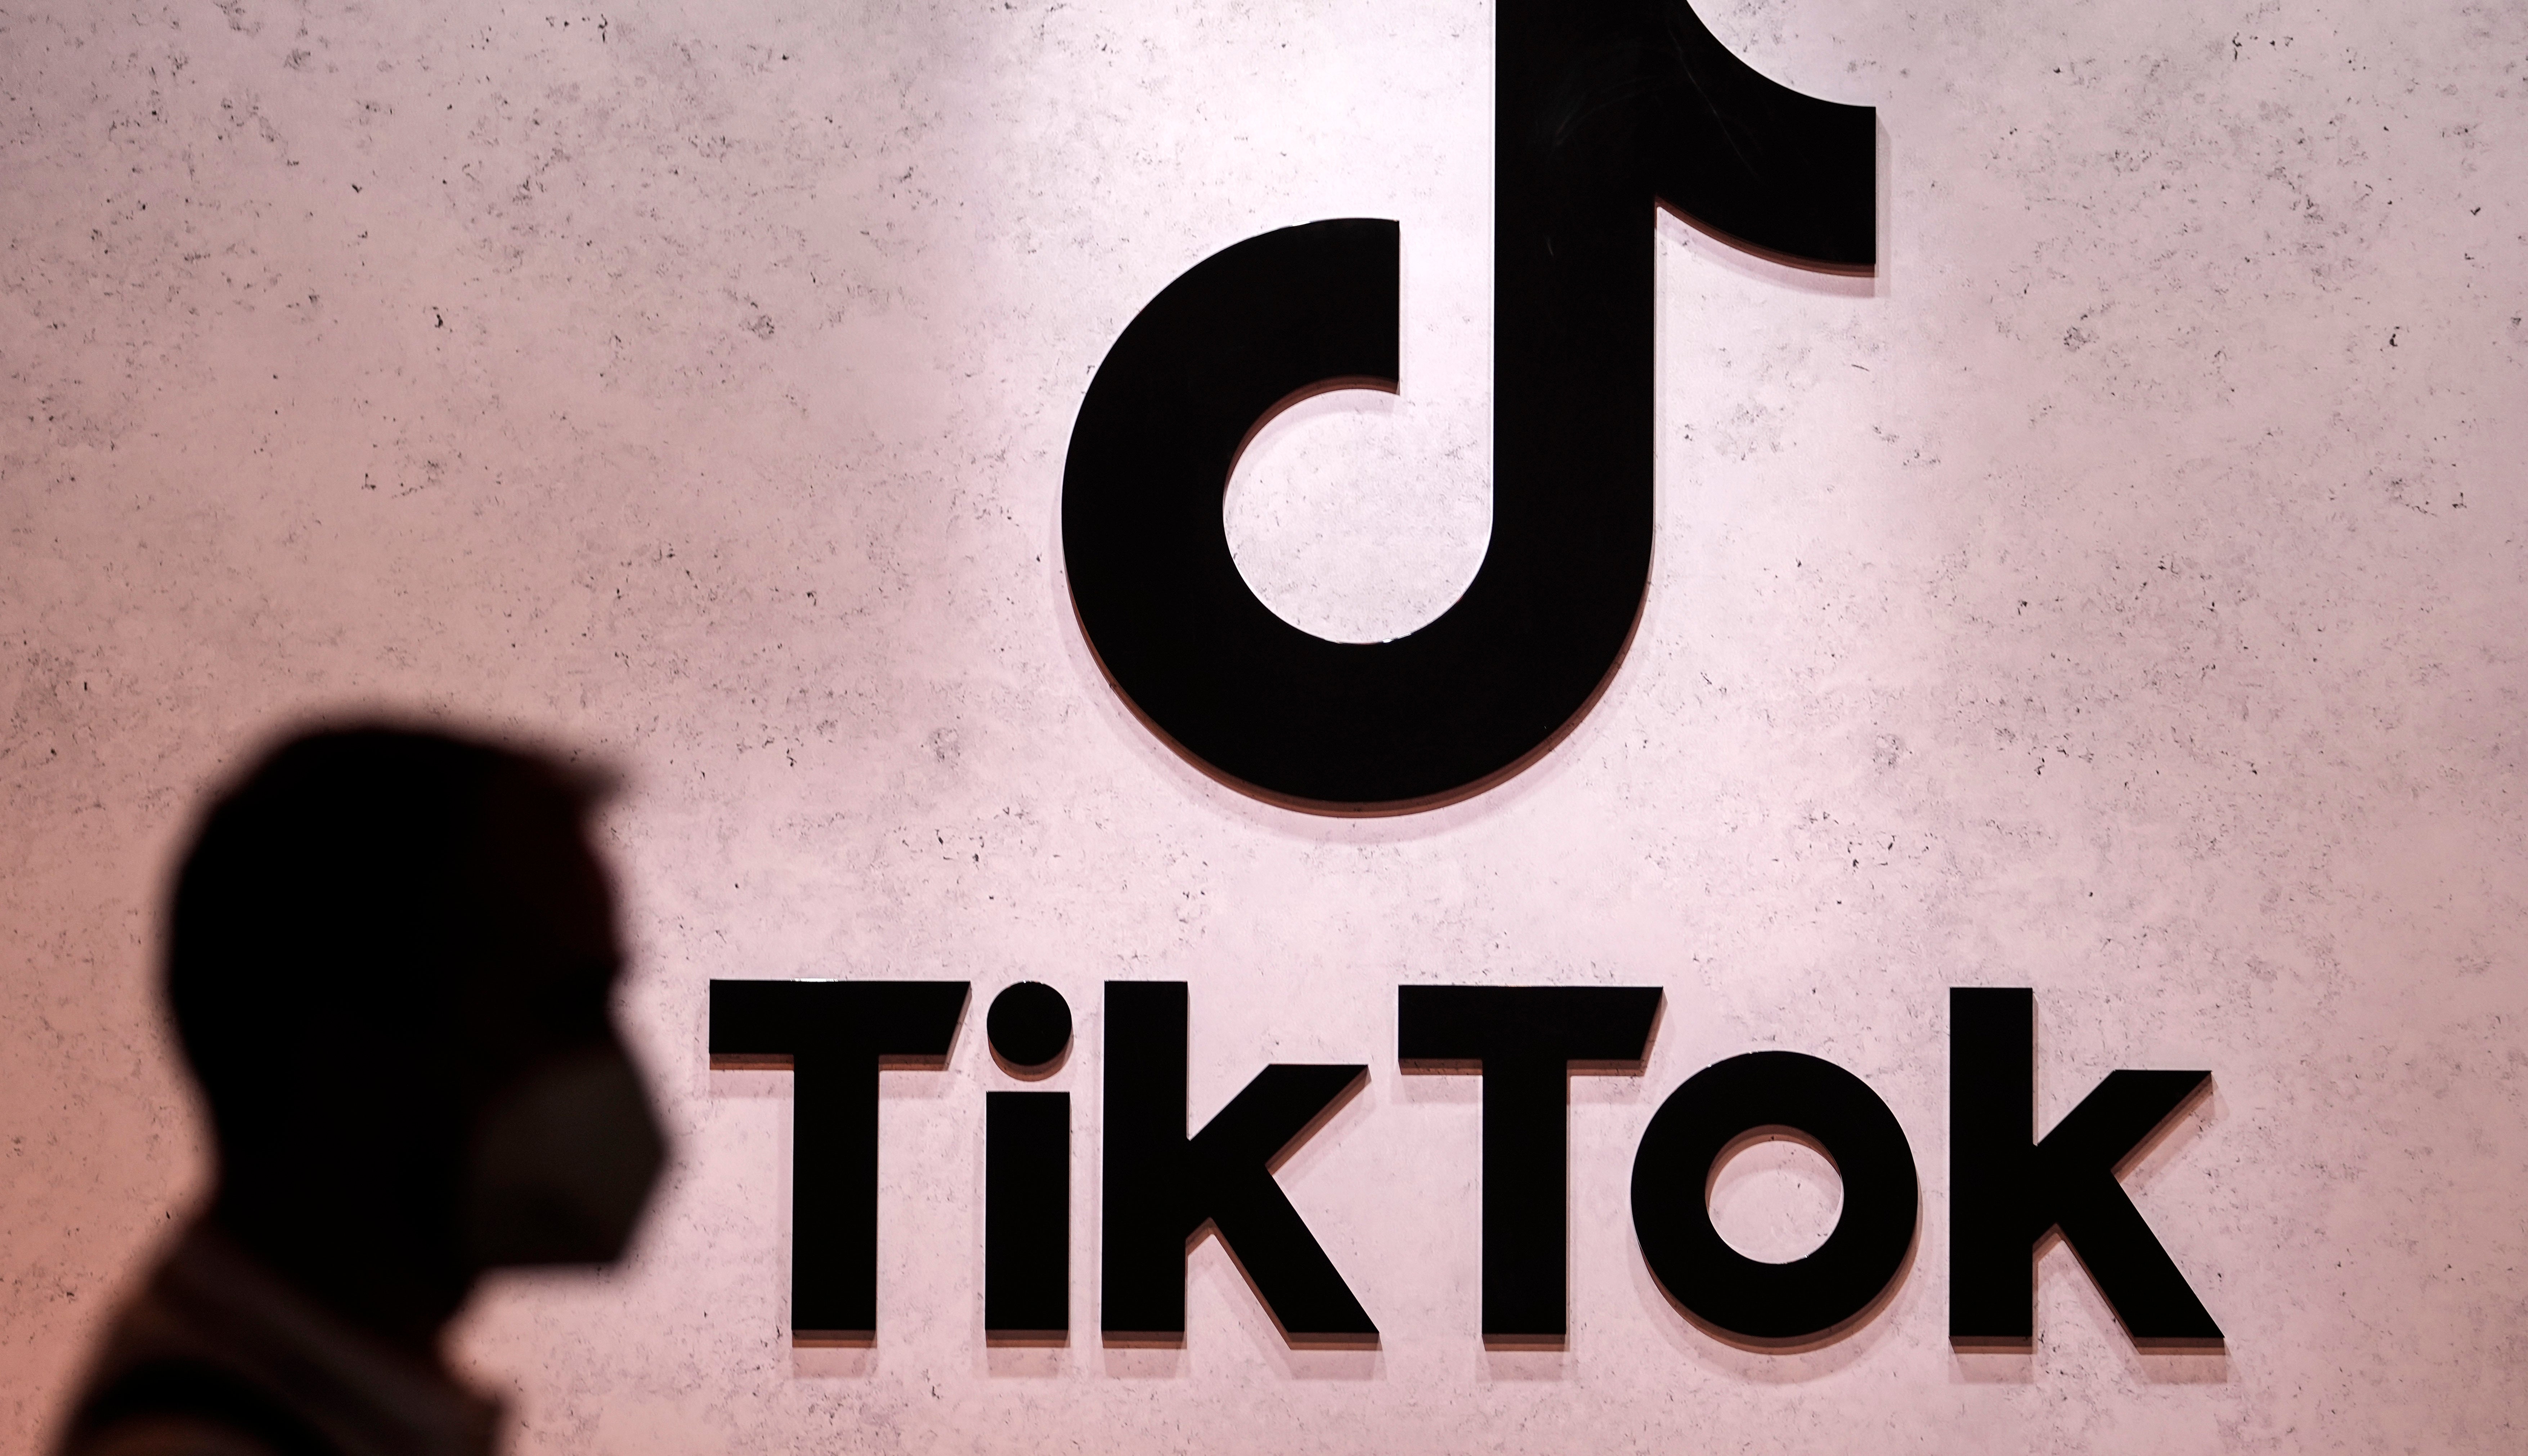 TikTok has repeatedly denied that its data can be accessed in China